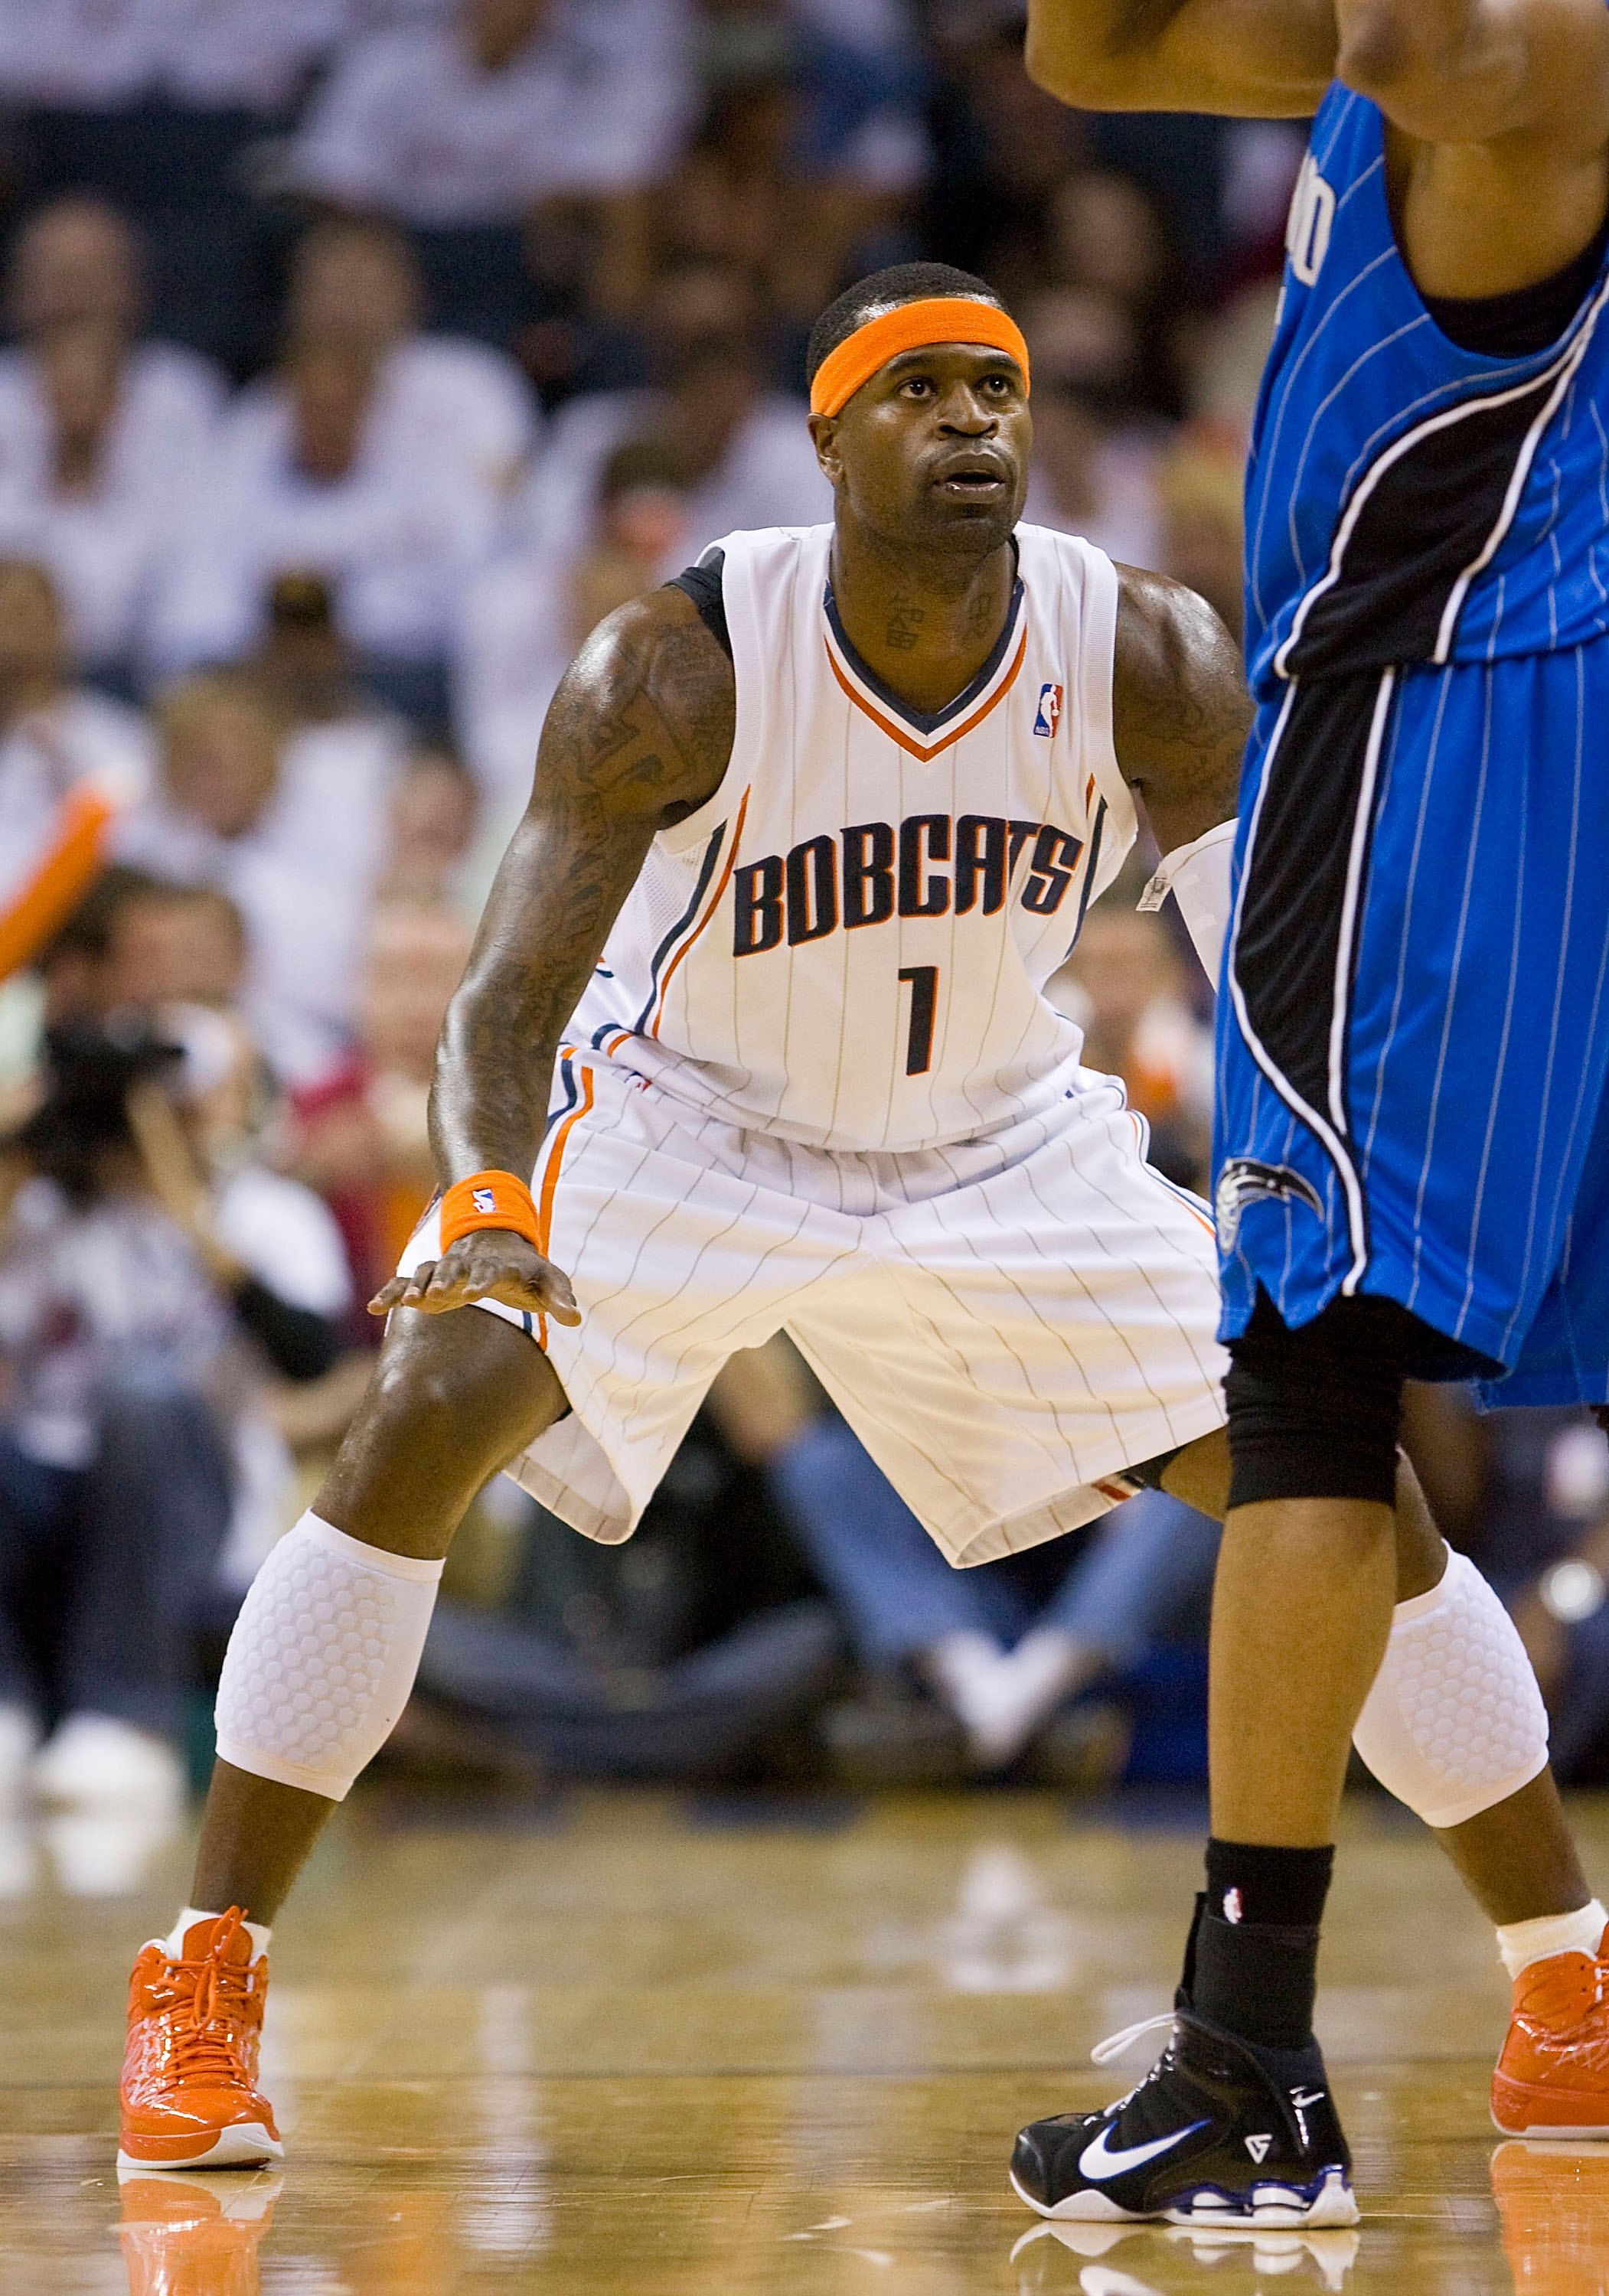 CHARLOTTE, NC - APRIL 26: Stephen Jackson #1 of the Charlotte Bobcats on defense against the Orlando Magic at Time Warner Cable Arena on April 26, 2010 in Charlotte, North Carolina.  The Magic defeated the Bobcats 99-90 to complete the four game sweep.  N